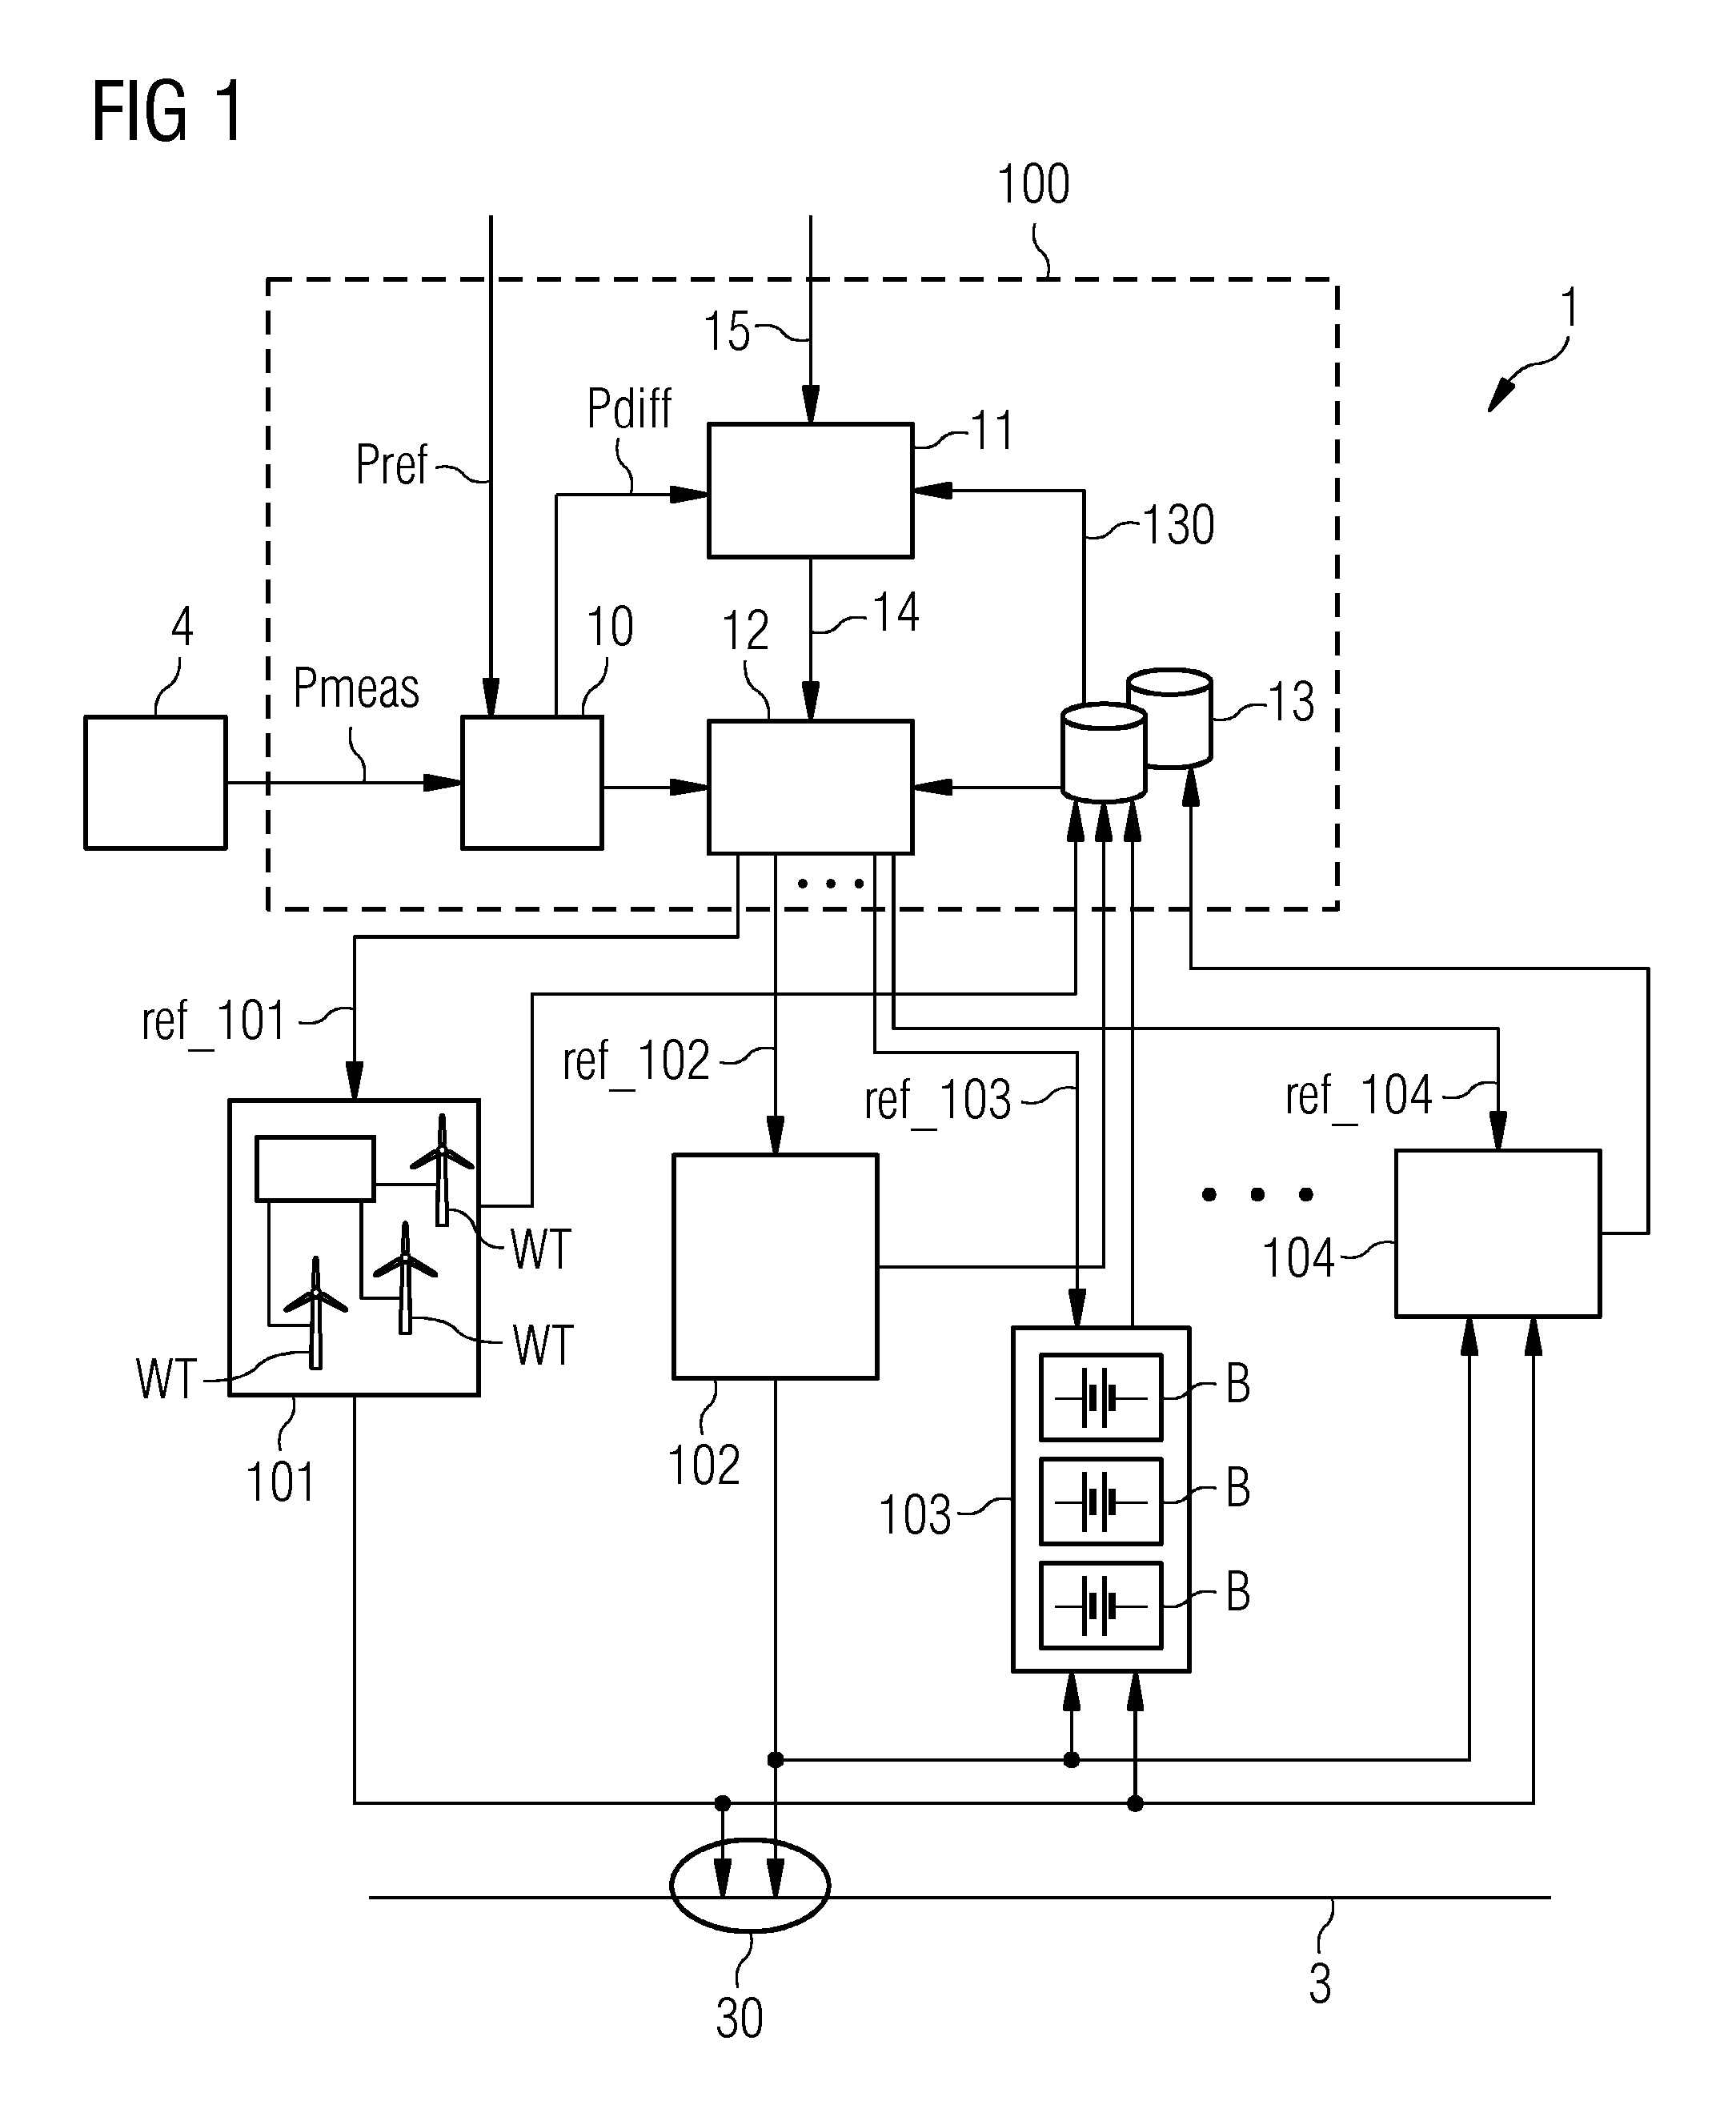 Method of controlling a power plant